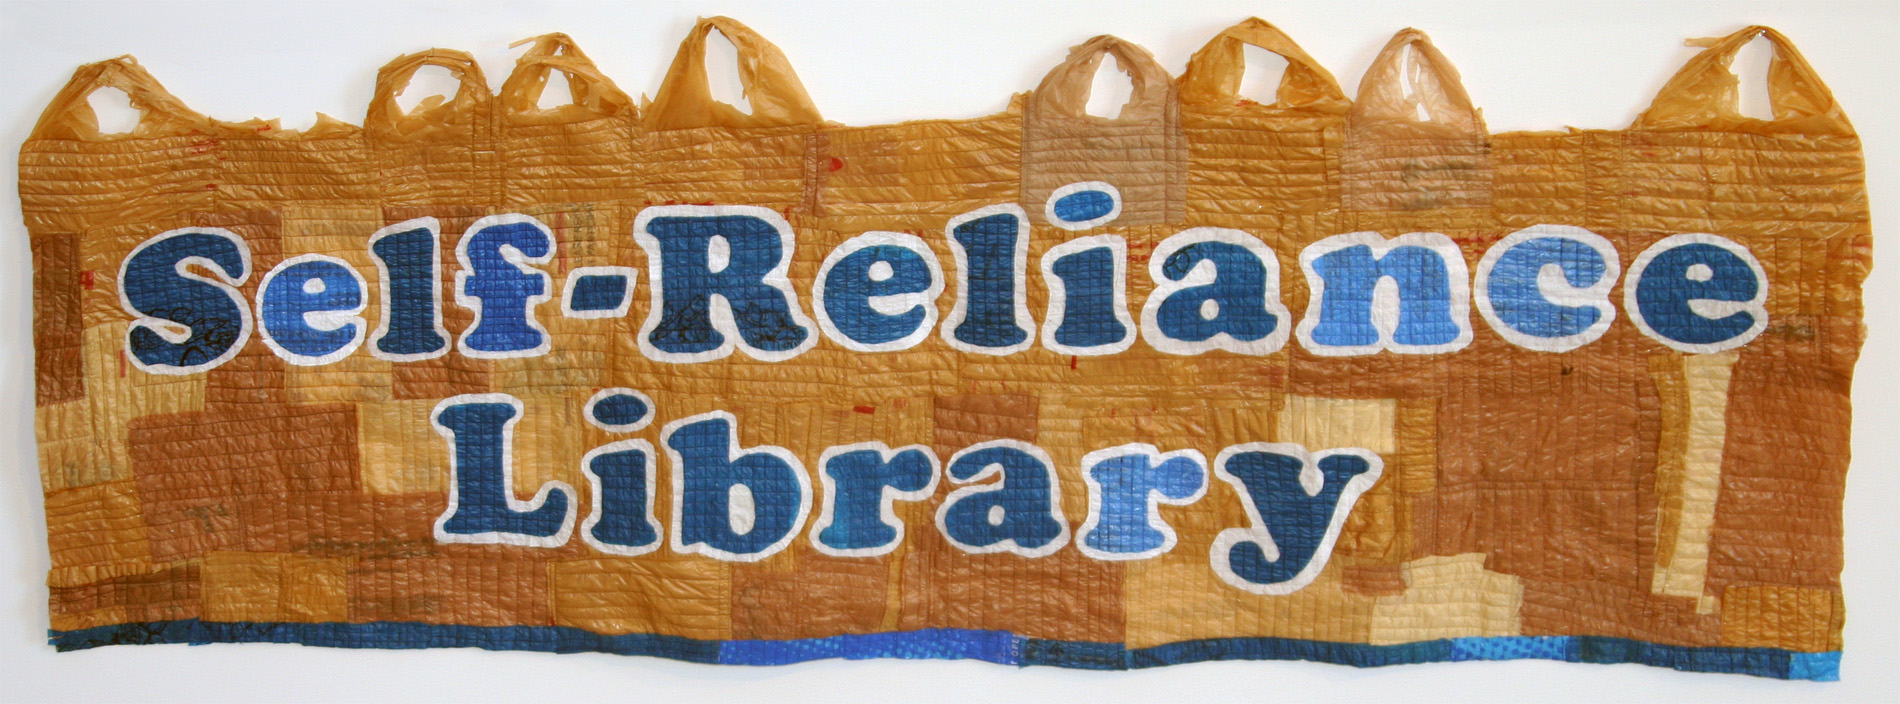 Self-Reliance Library Banner